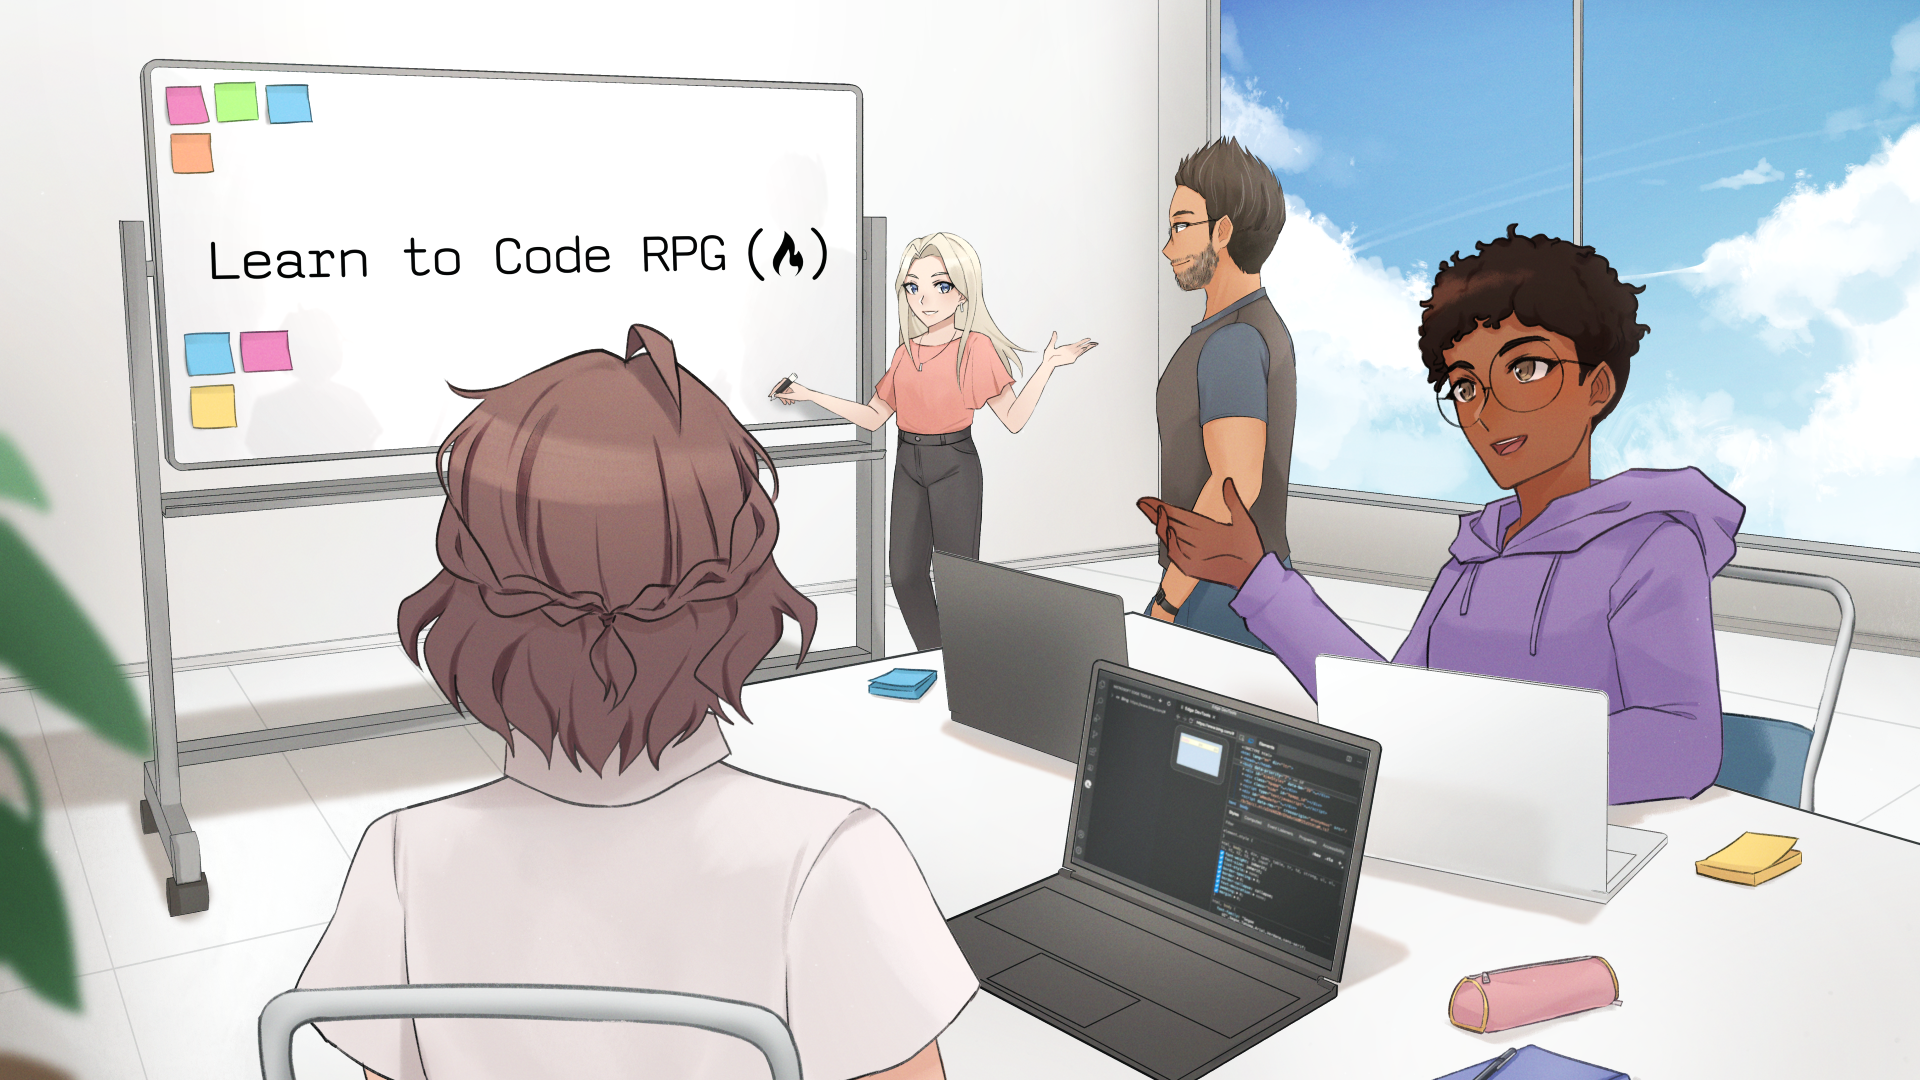 Learn to Code RPG – A Visual Novel Video Game Where you Learn Computer Science Concepts